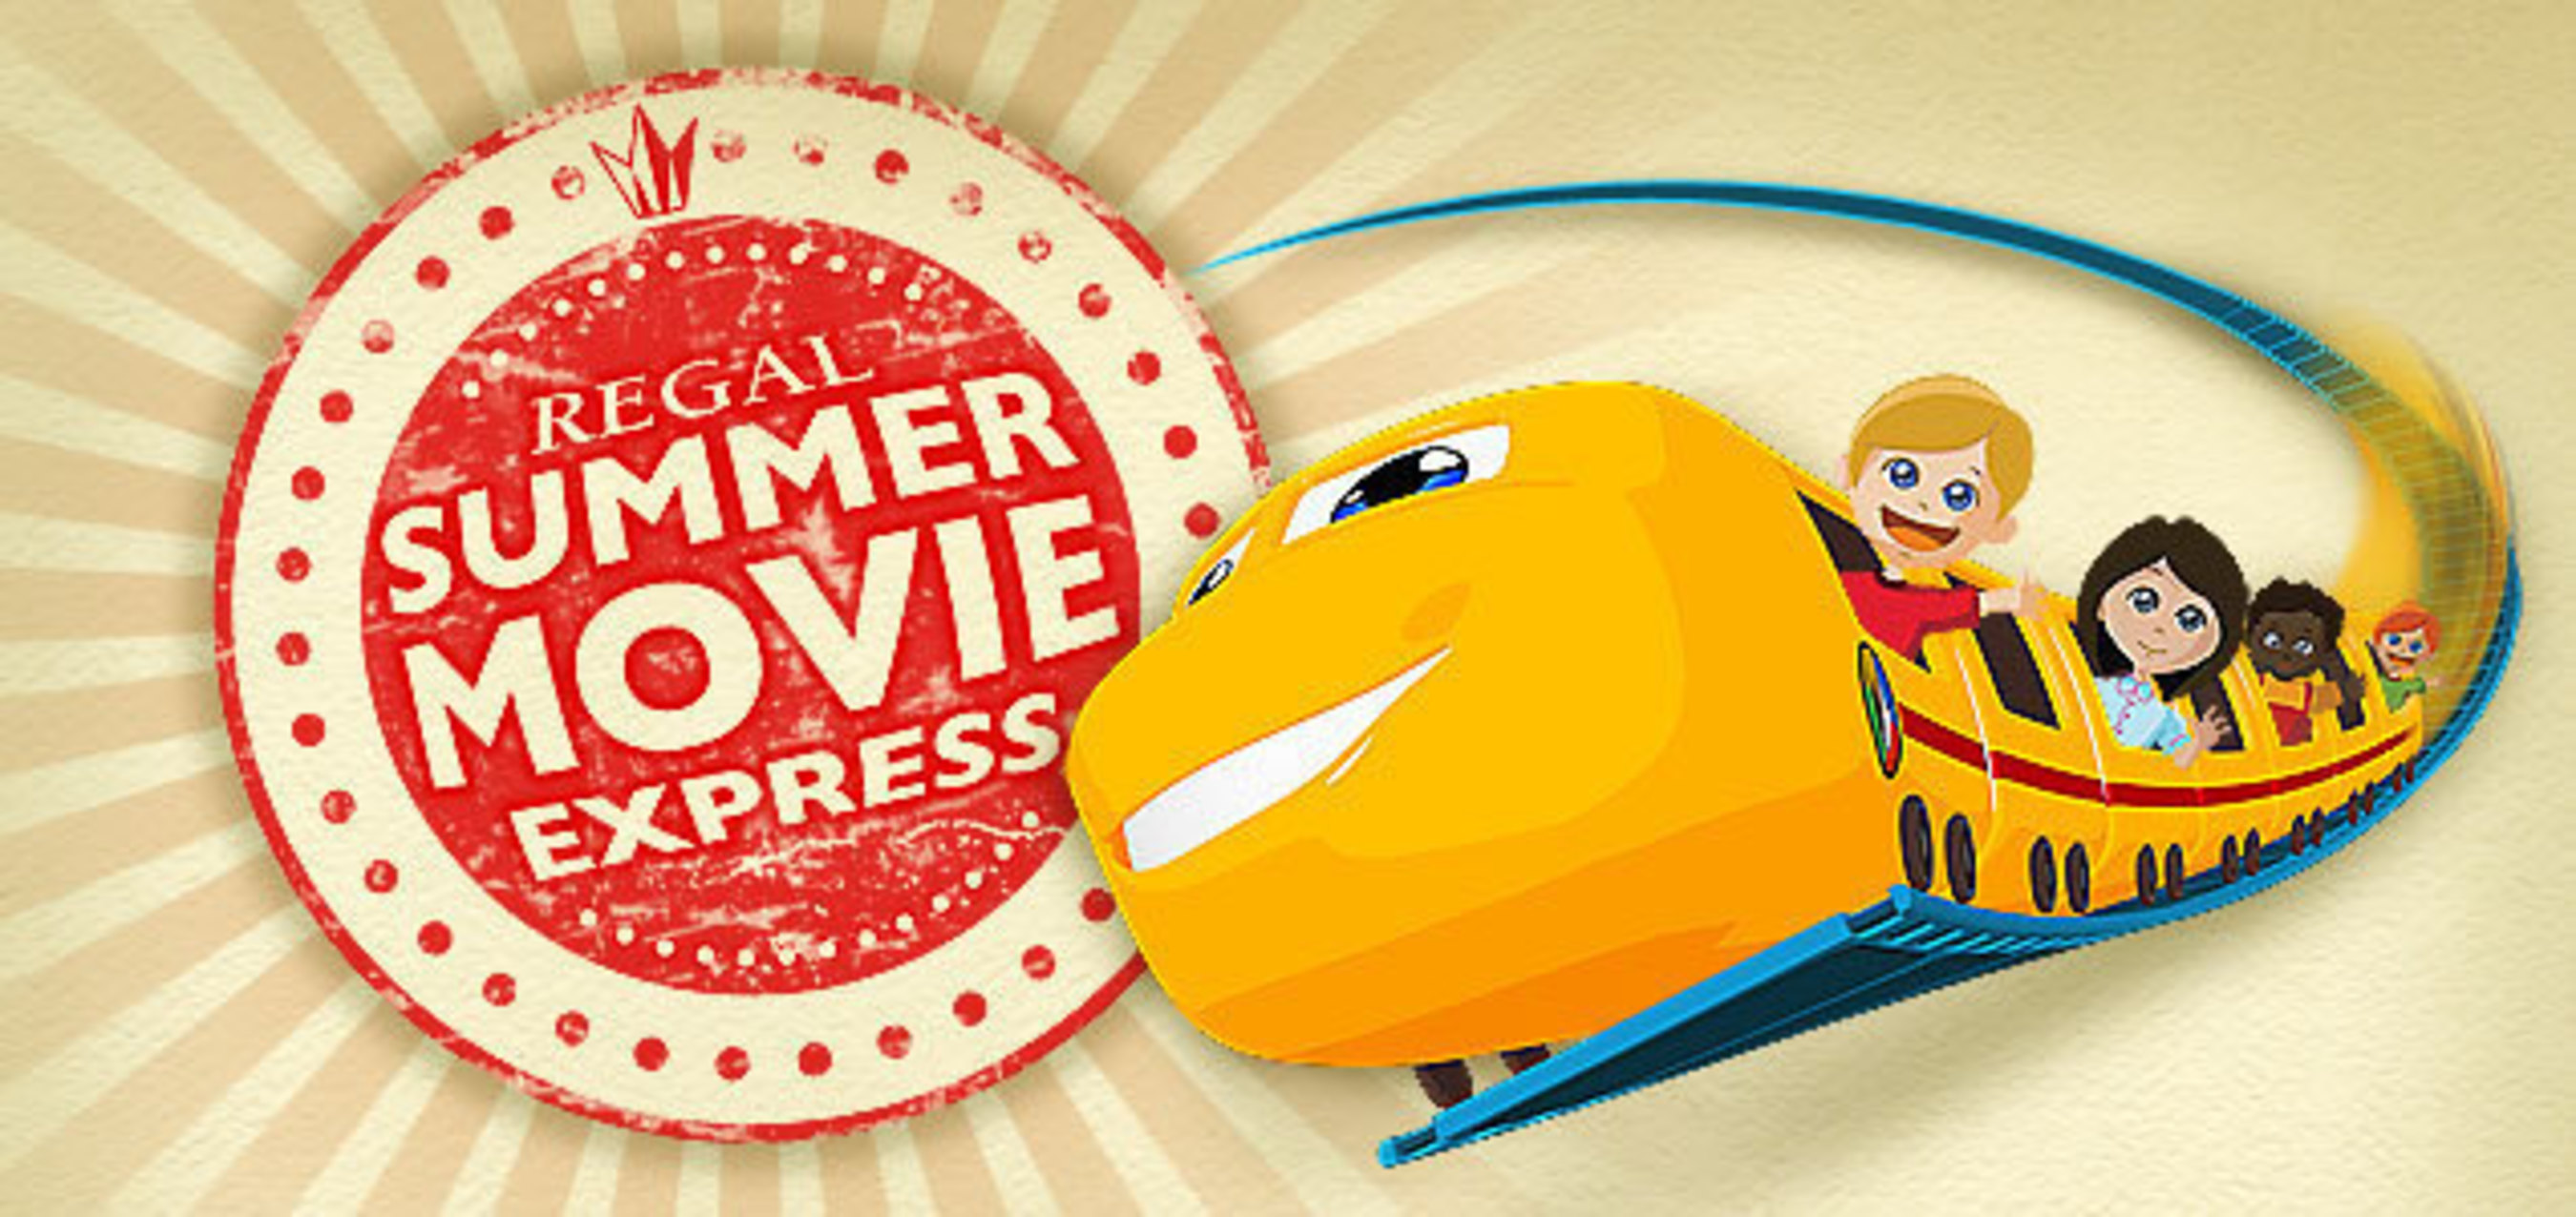 Regal Entertainment Group announces $1 movies for 2014 Summer Movie Express
Image Source: Regal Entertainment Group (PRNewsFoto/Regal Entertainment Group)